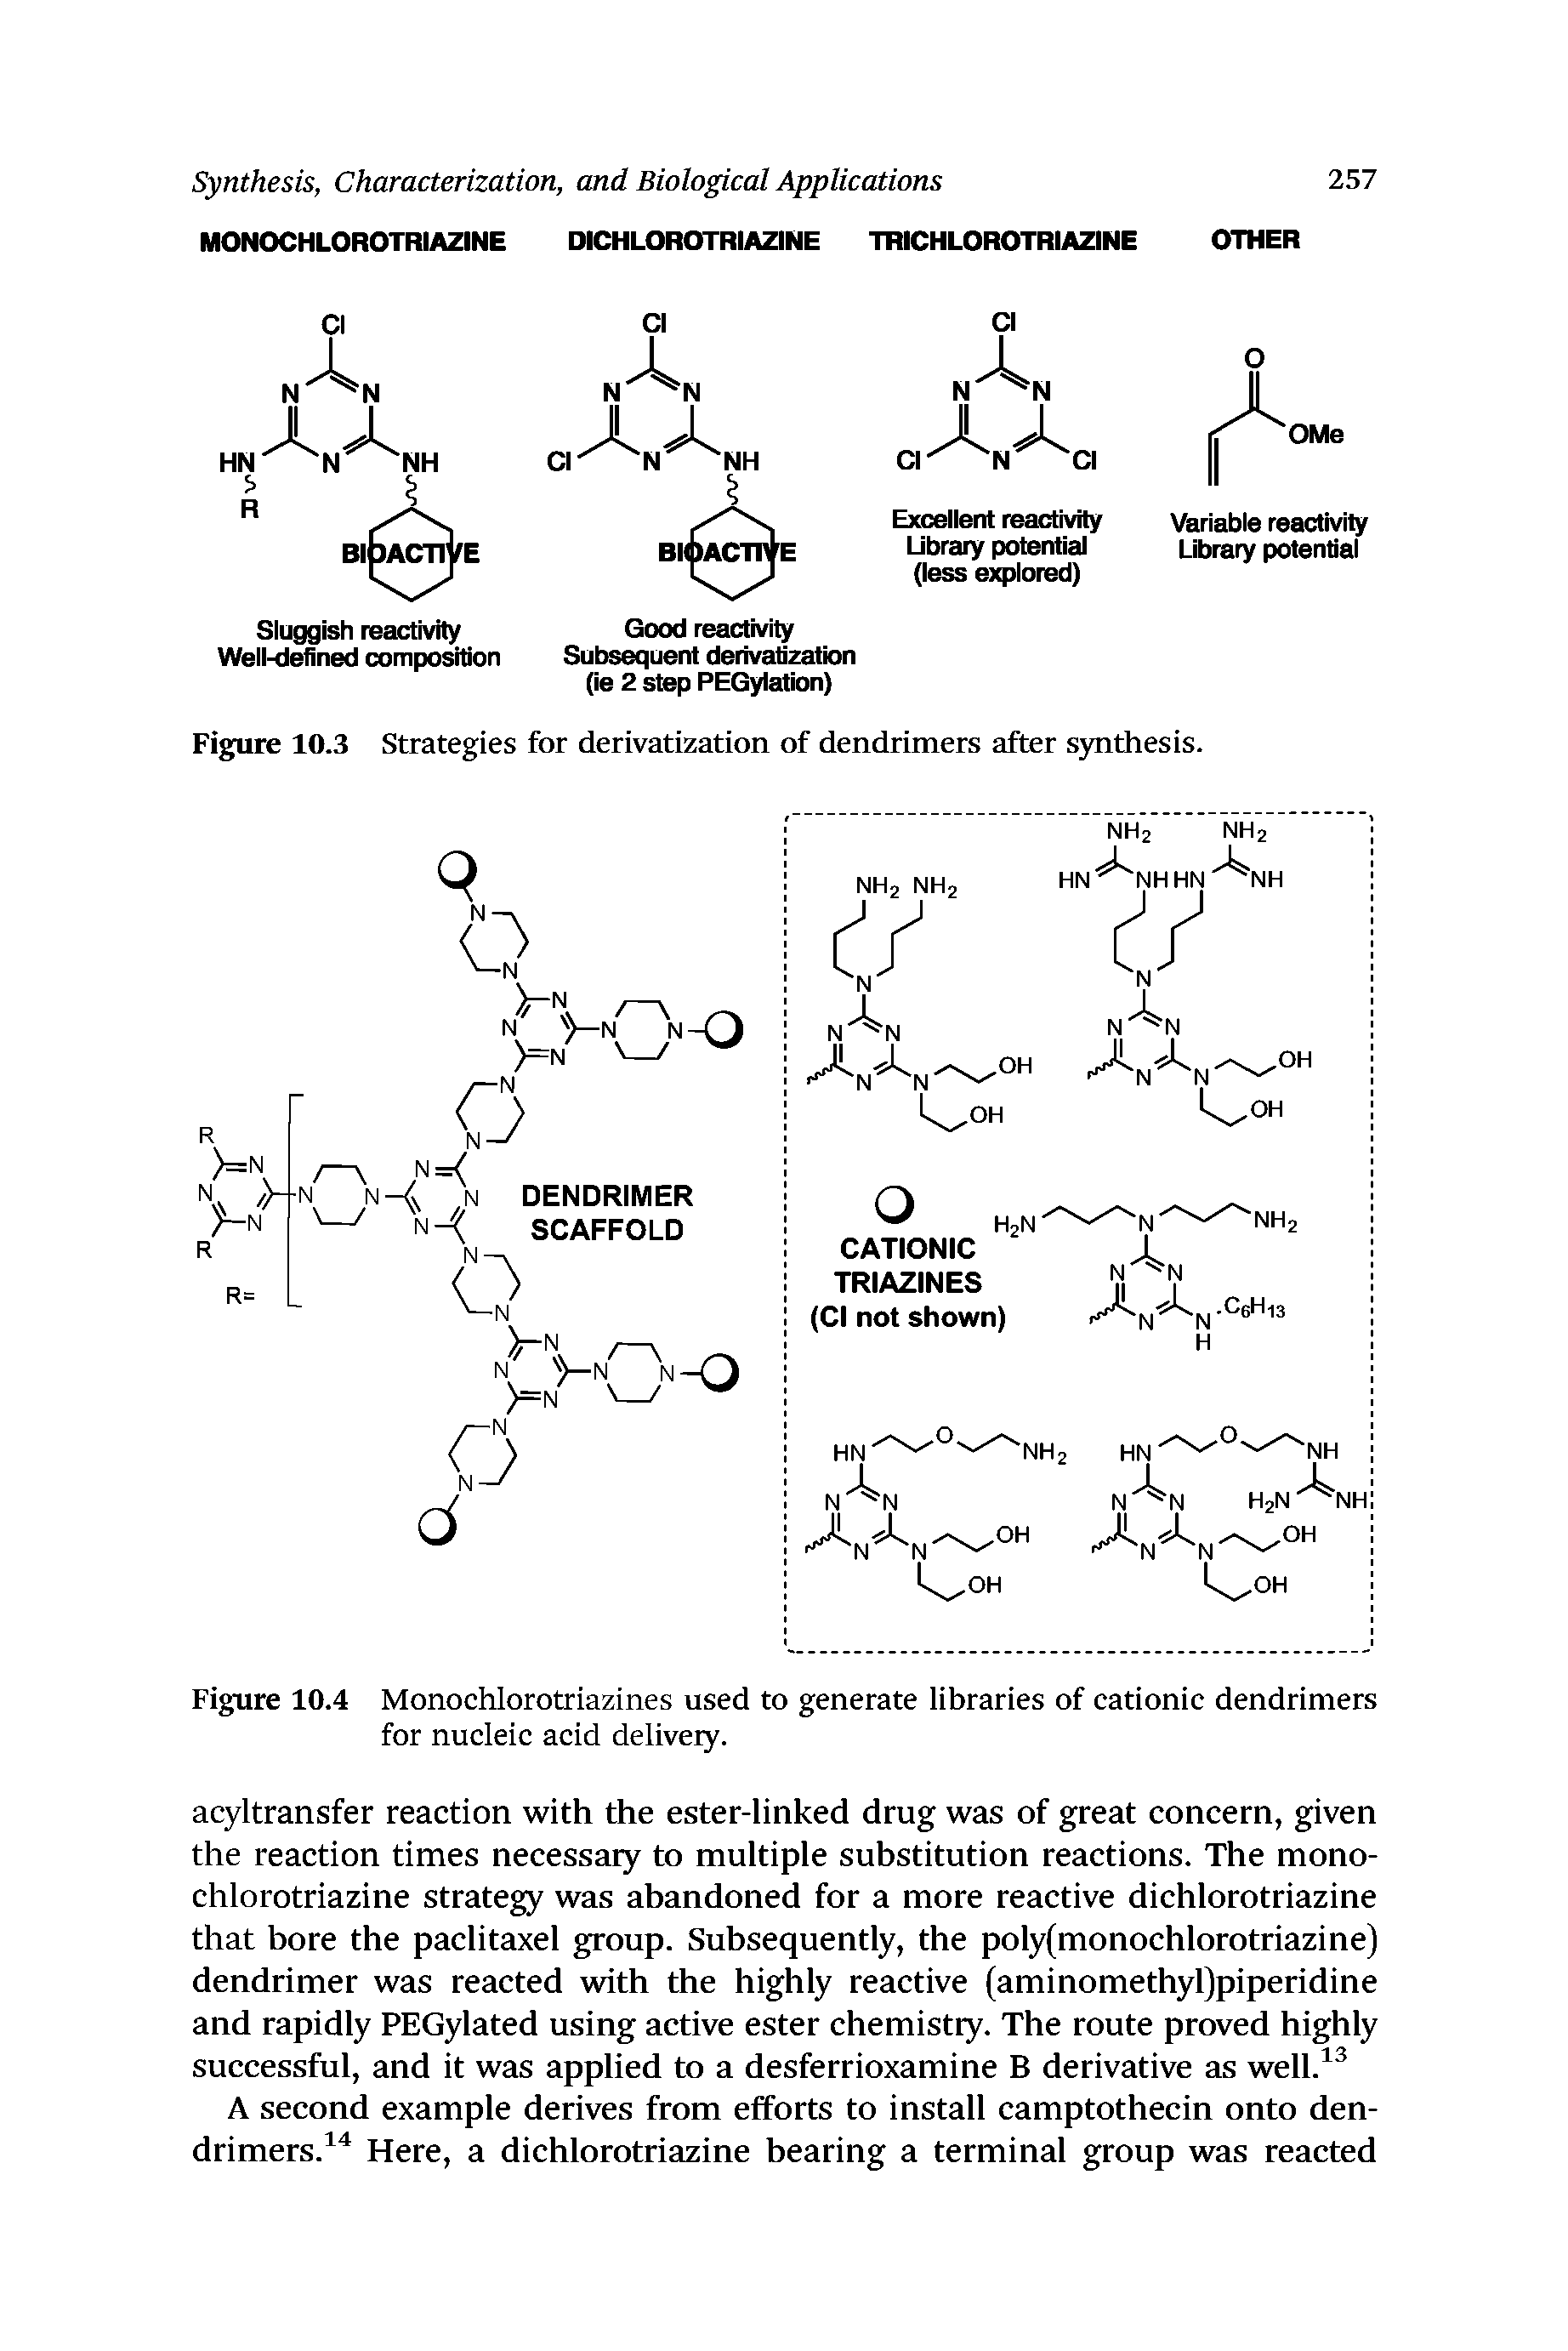 Figure 10.4 Monochlorotriazines used to generate libraries of cationic dendrimers for nucleic acid deliveiy.